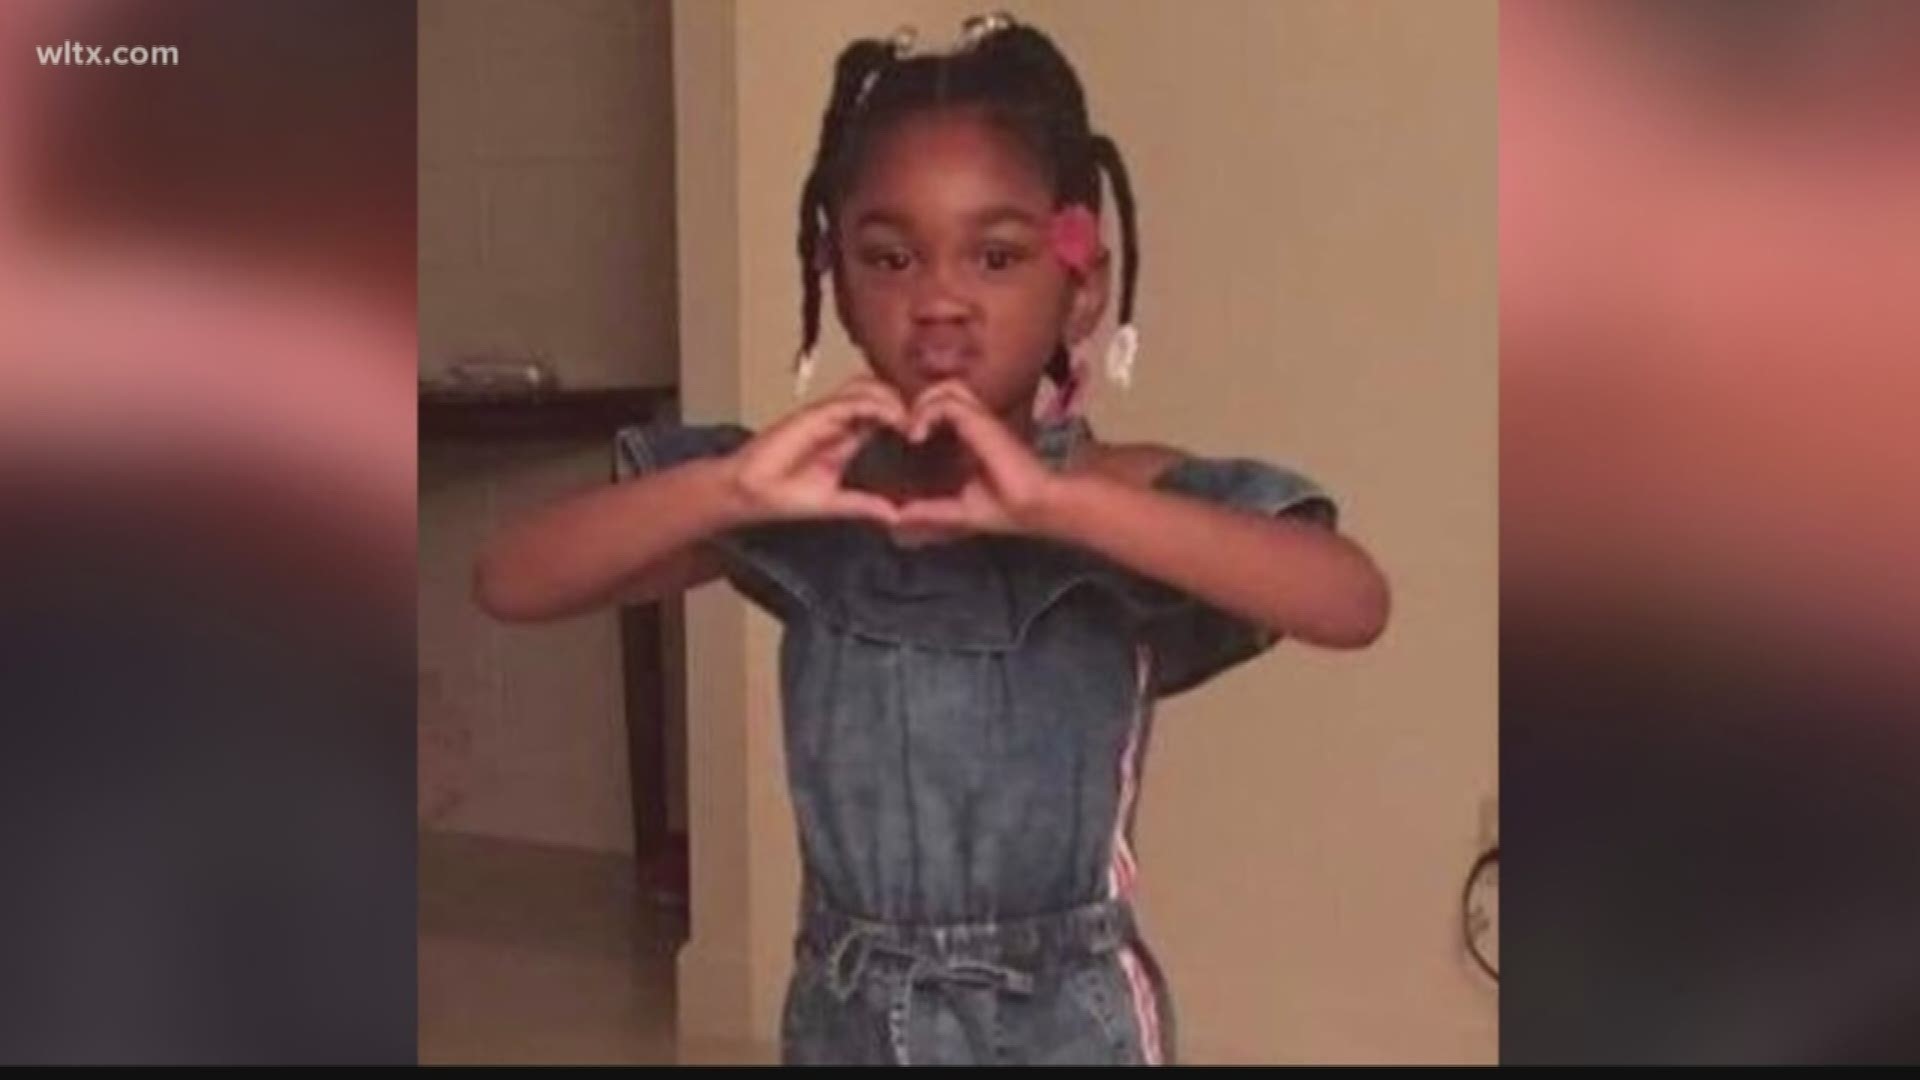 The search is over for 5-year-old Neveah Adams, investigators found her body in a landfill on Friday.